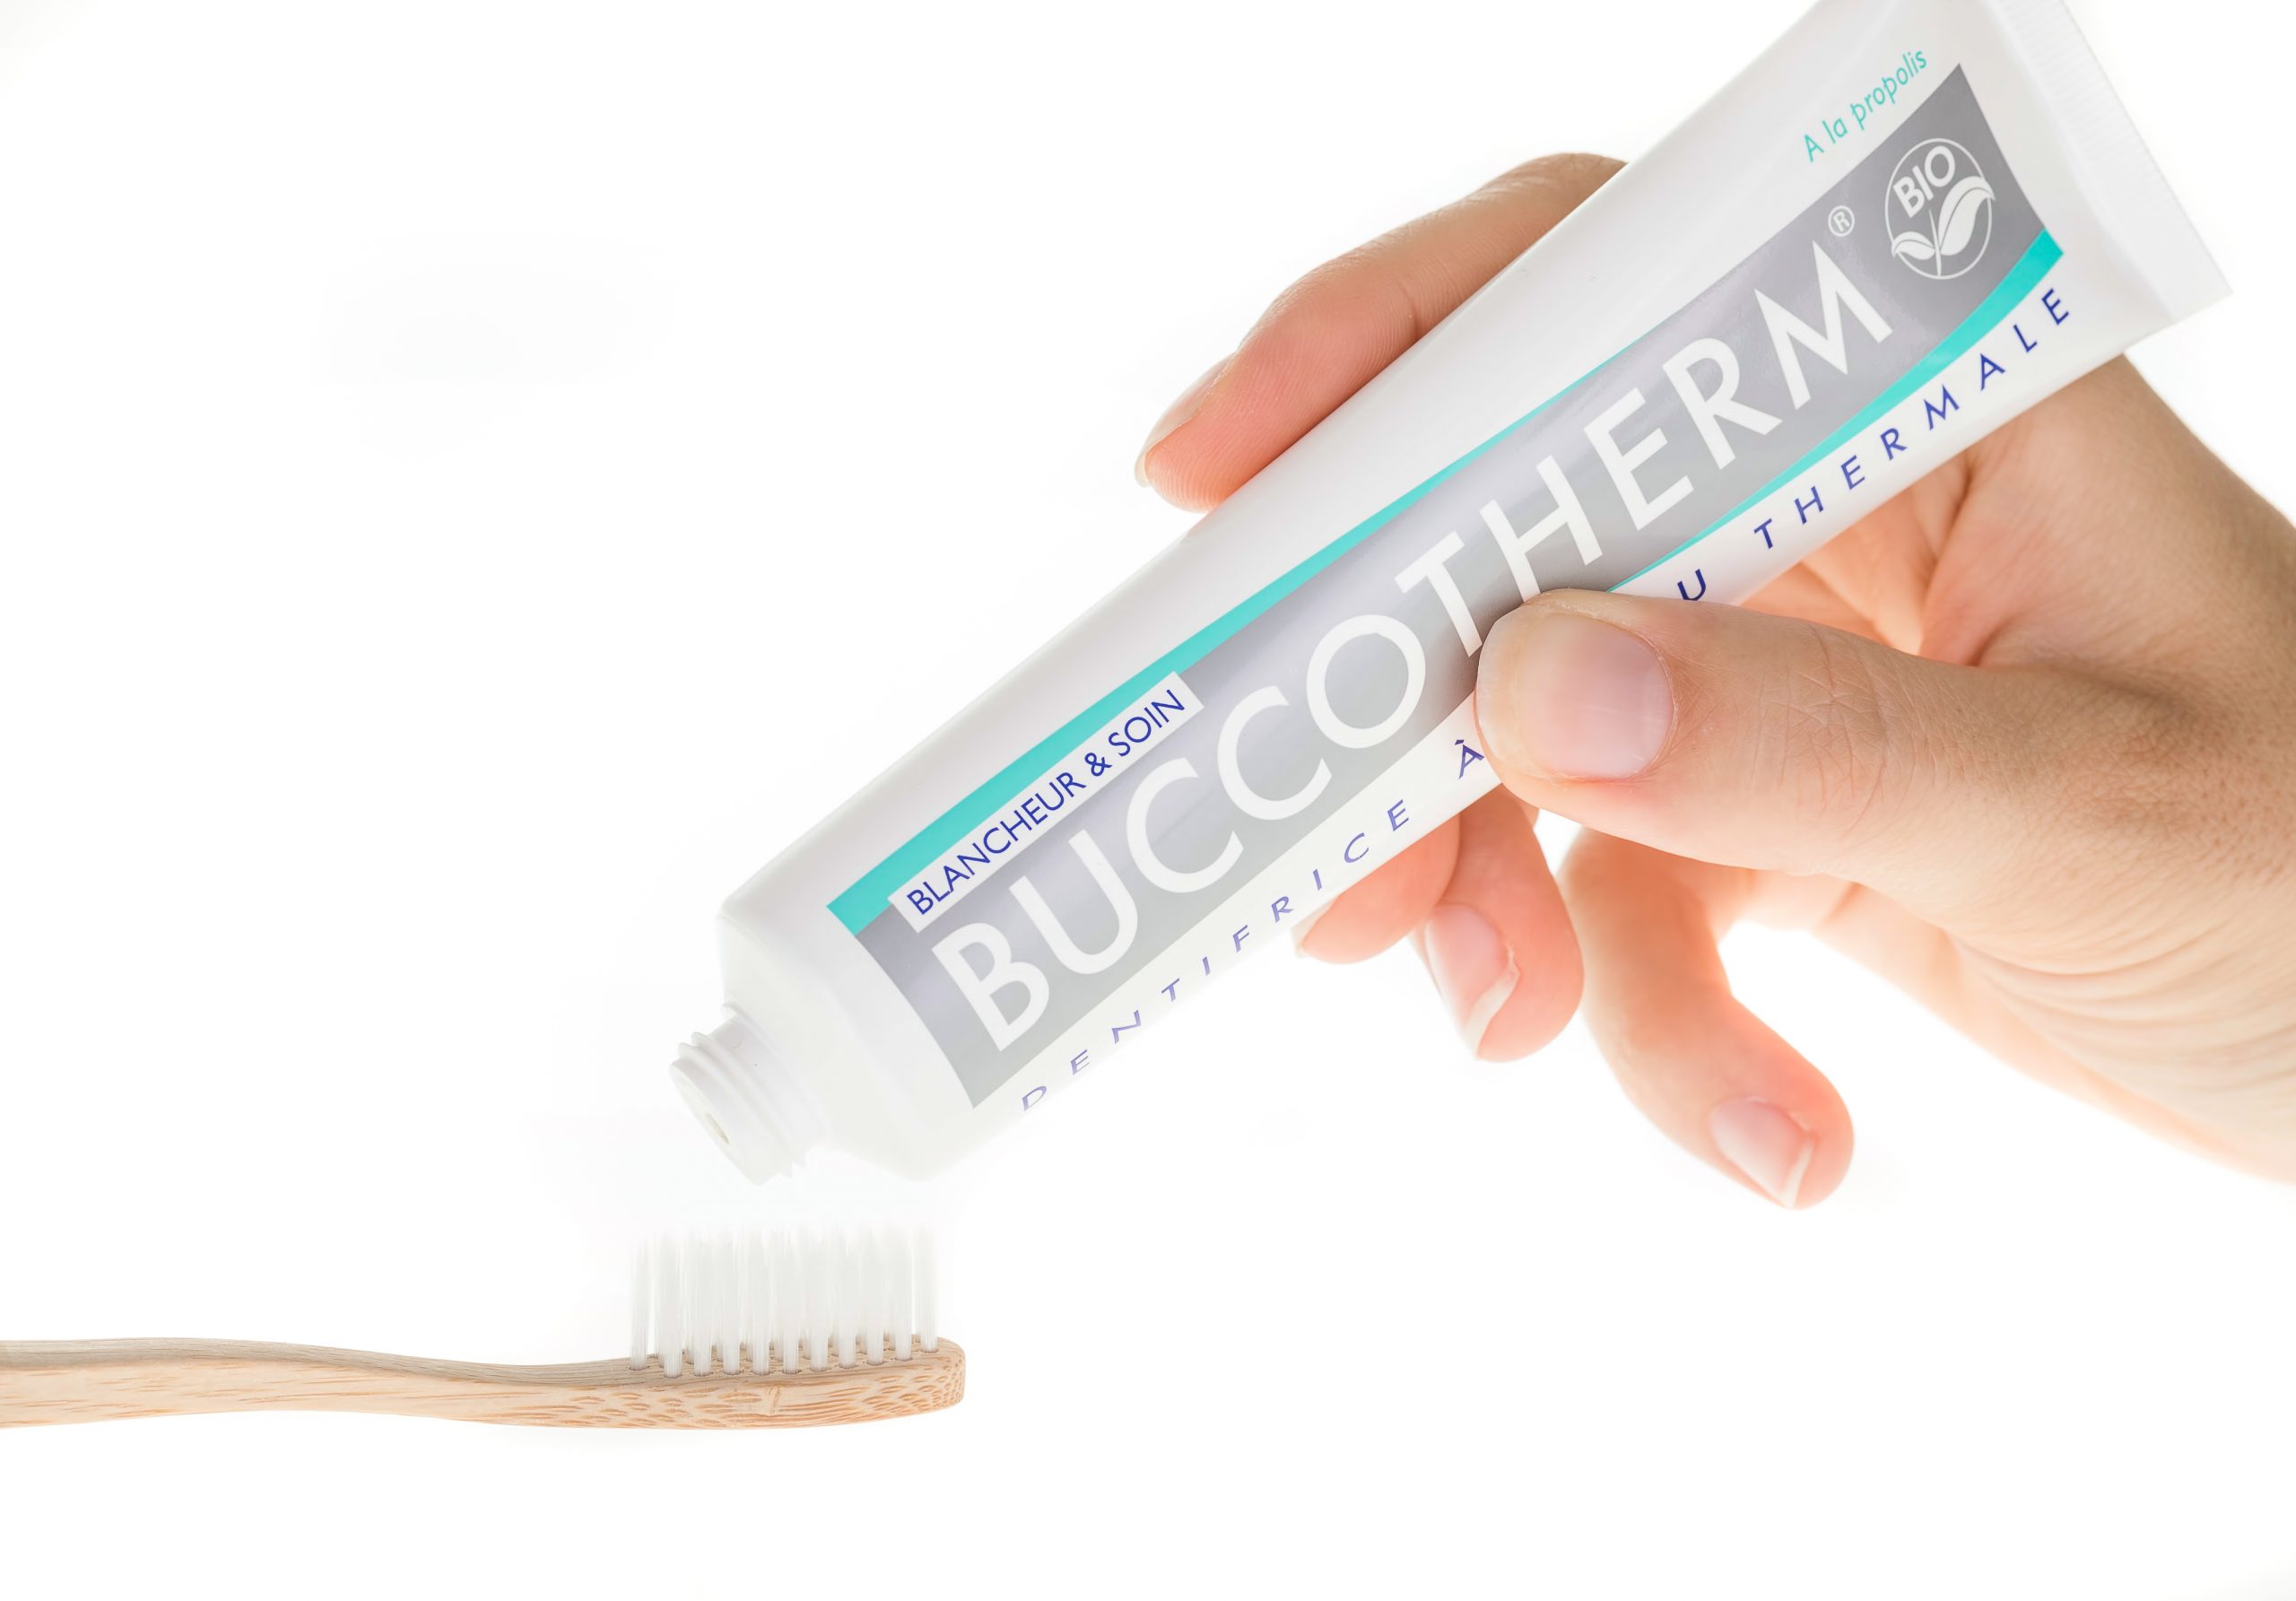 BUCCOTHERM® Whitening & Care certified Organic